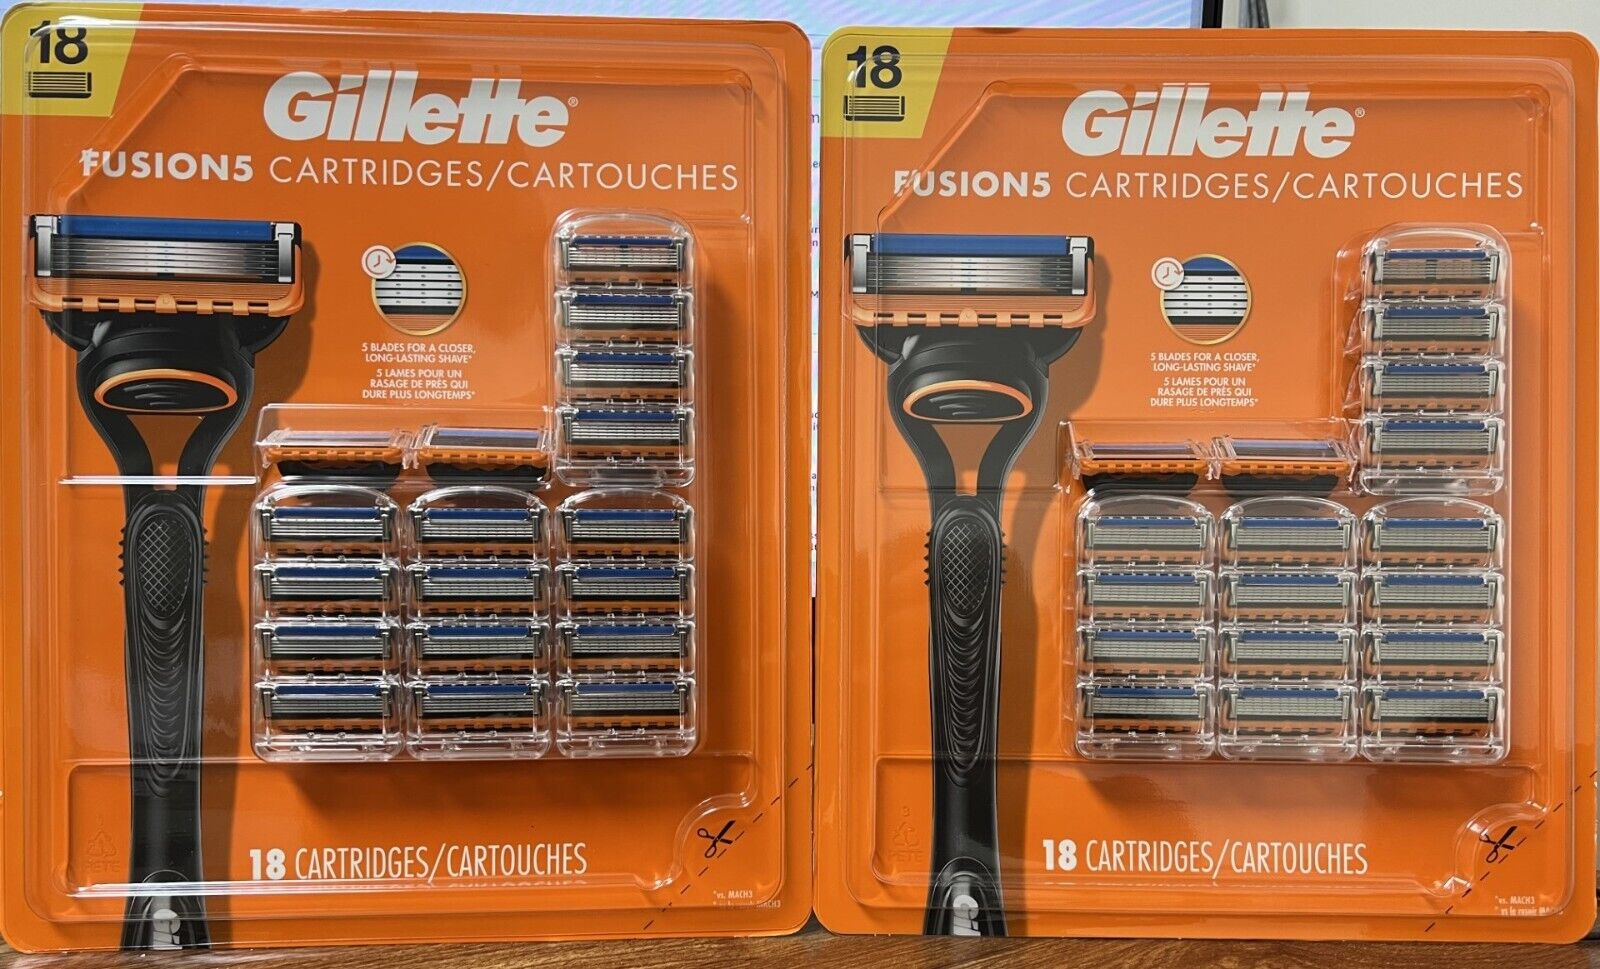 Gillette Fusion 5 Razor Blades 36 Cartridge Only Factory Sealed pack NO HADLE